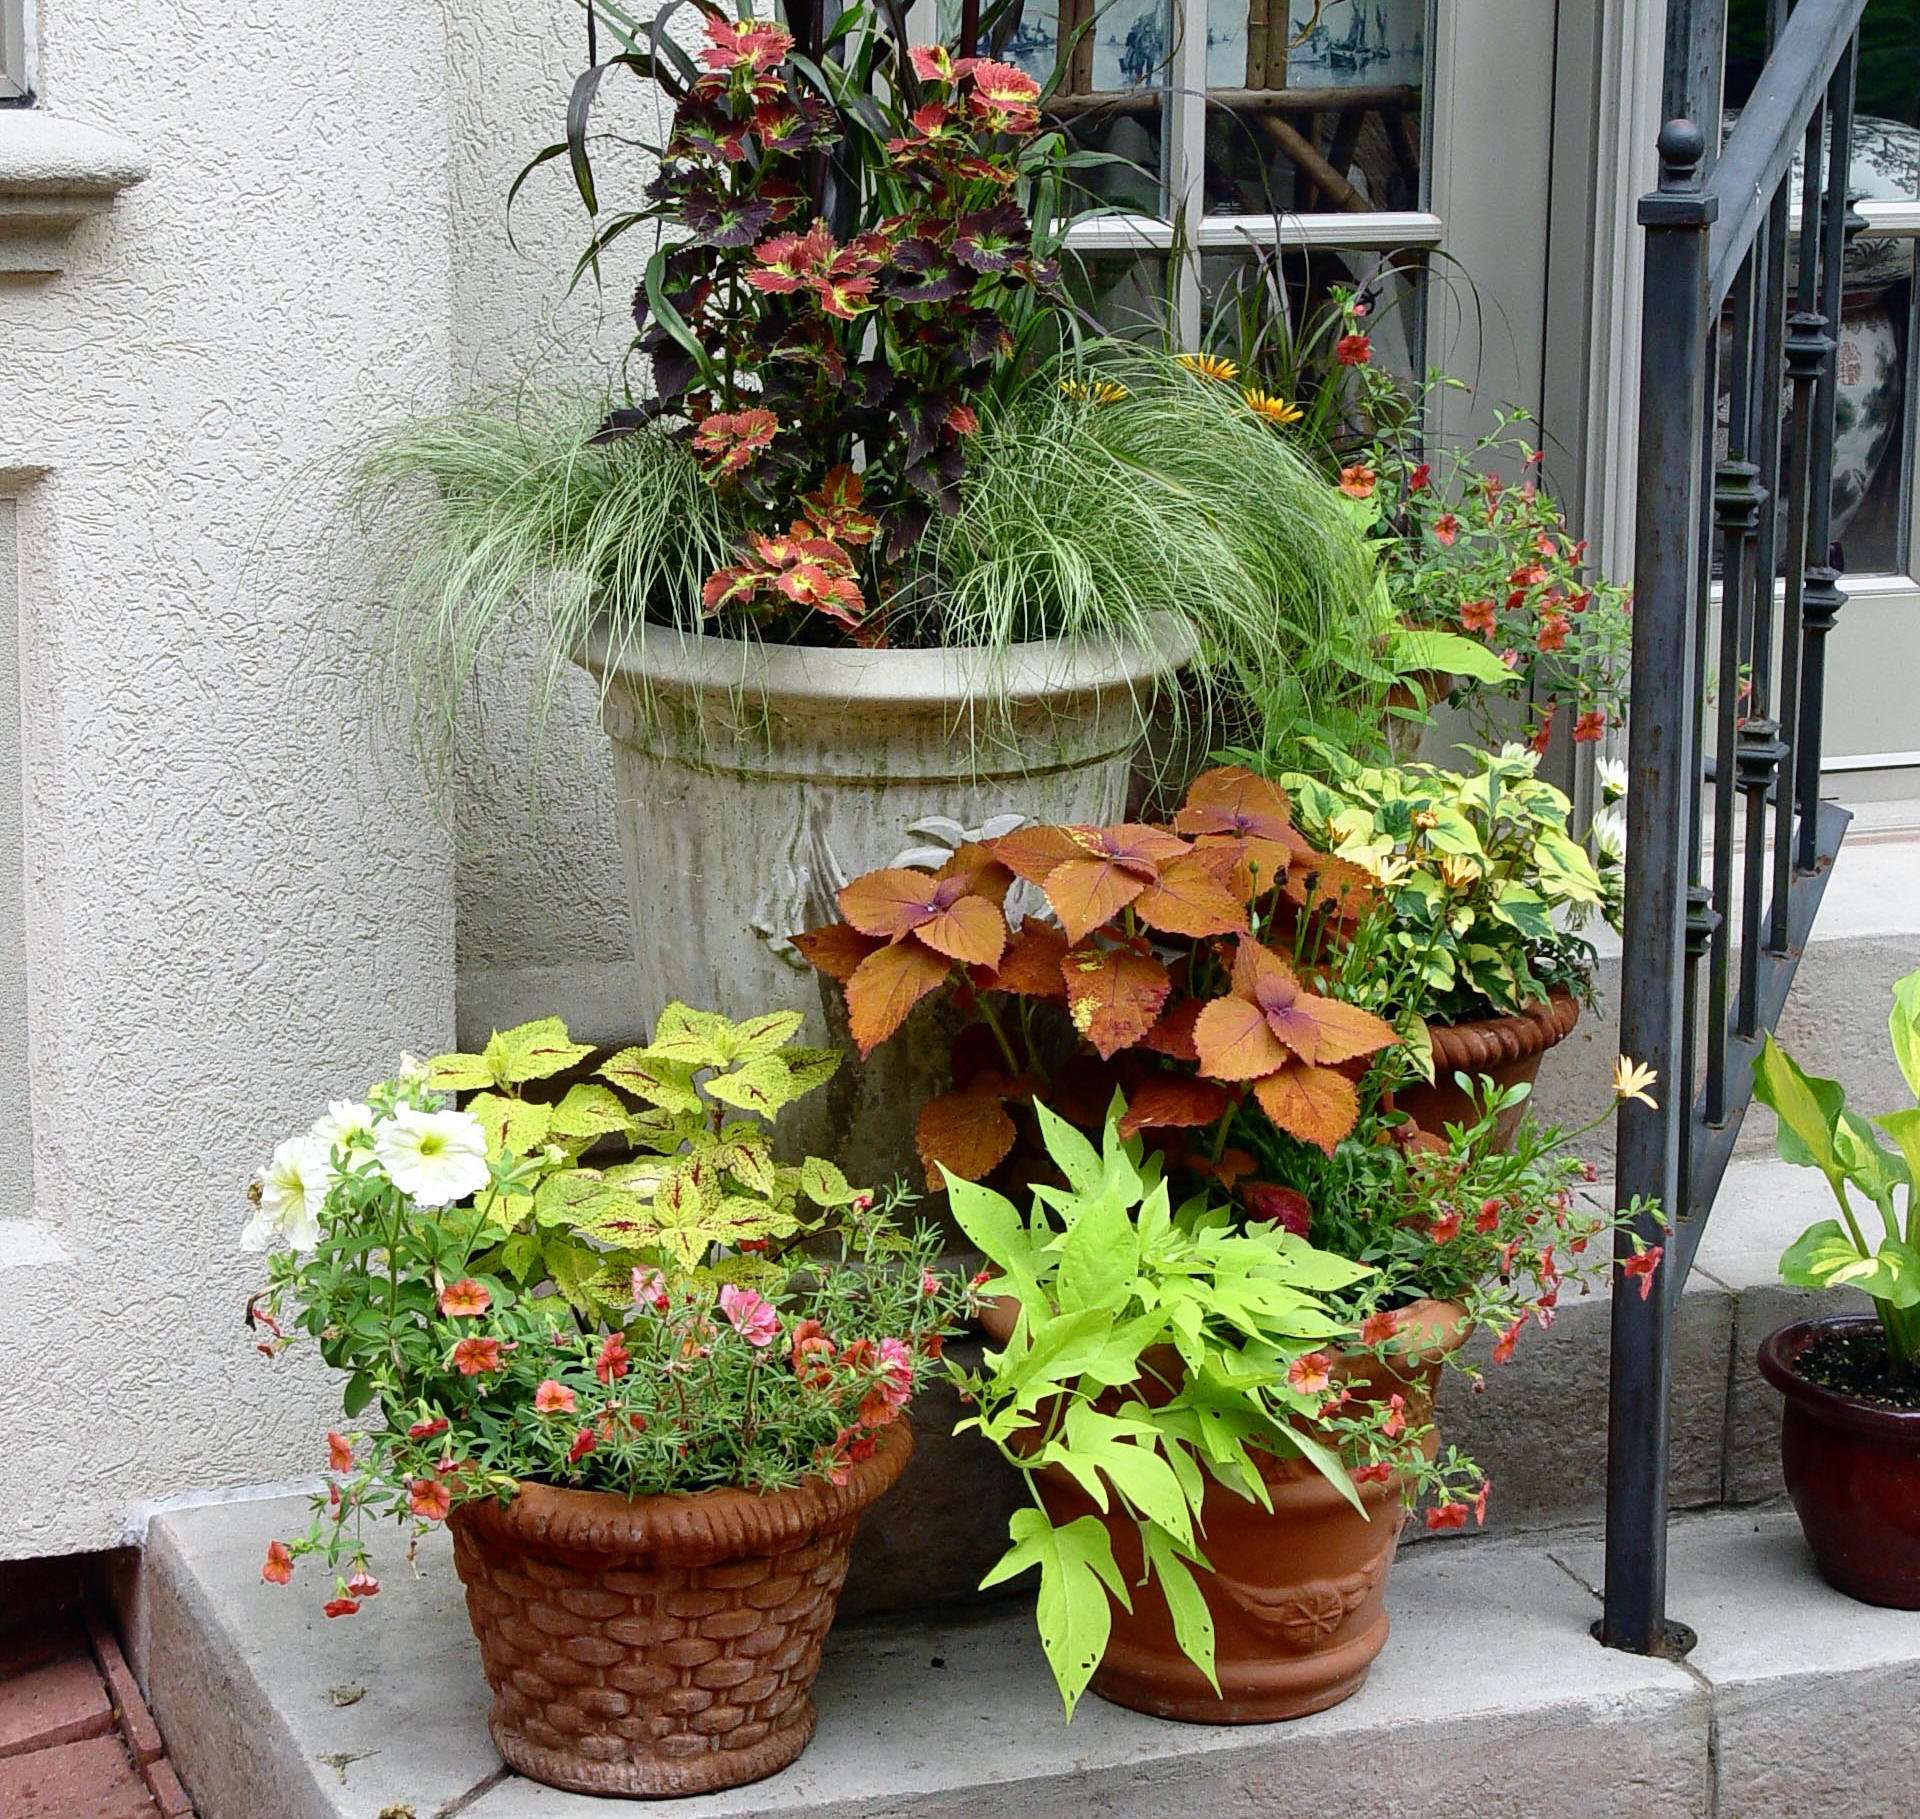 How To Arrange Potted Plants On A Patio Lovemypatioclub Com - How To Arrange Plants On Patio